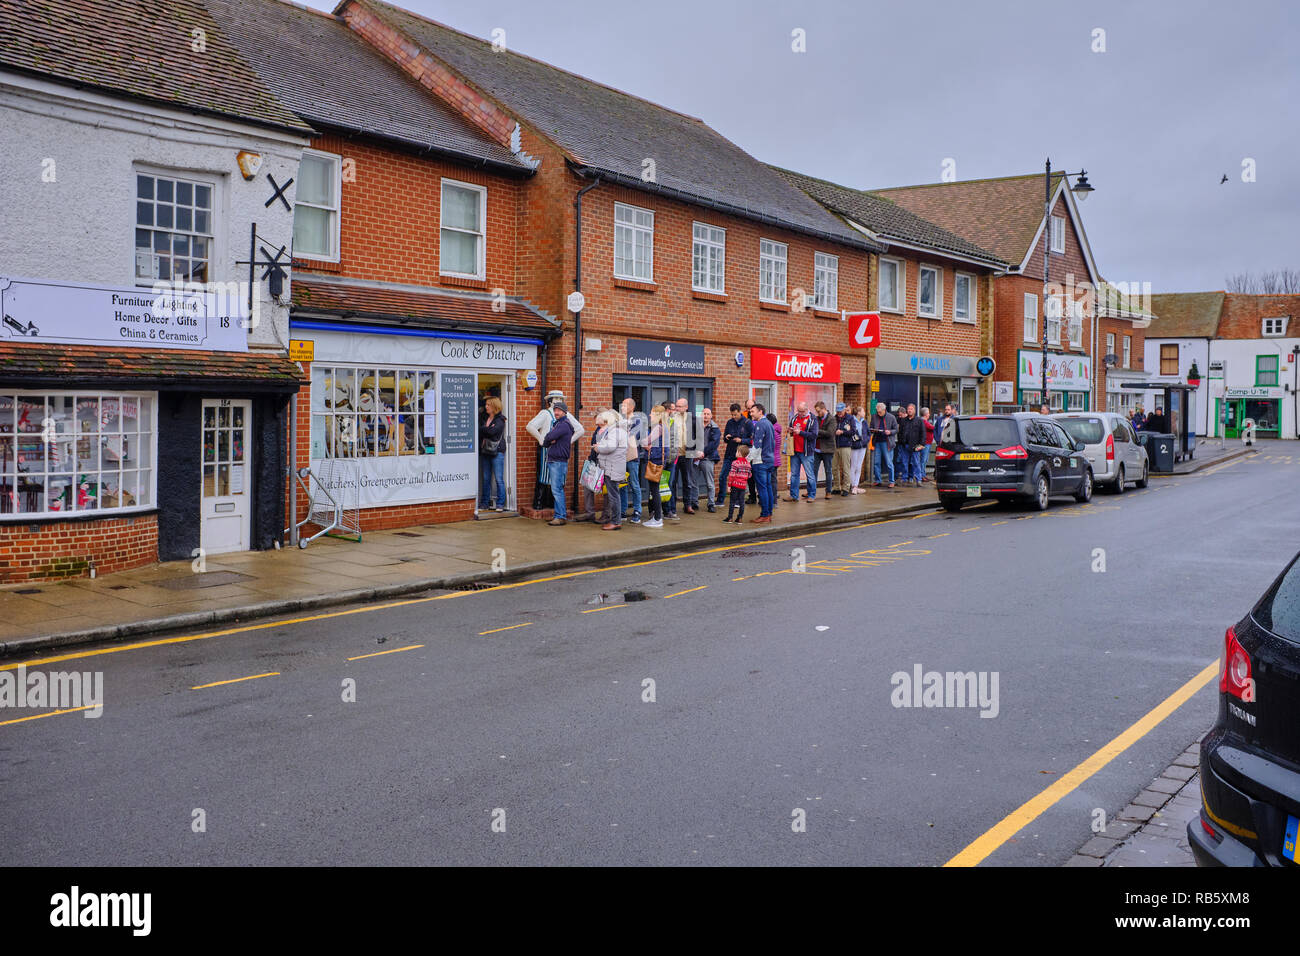 A long queue of people on the pavement waiting to enter the local butchers shop near Christmas in Thatcham high street, Berkshire, UK Stock Photo